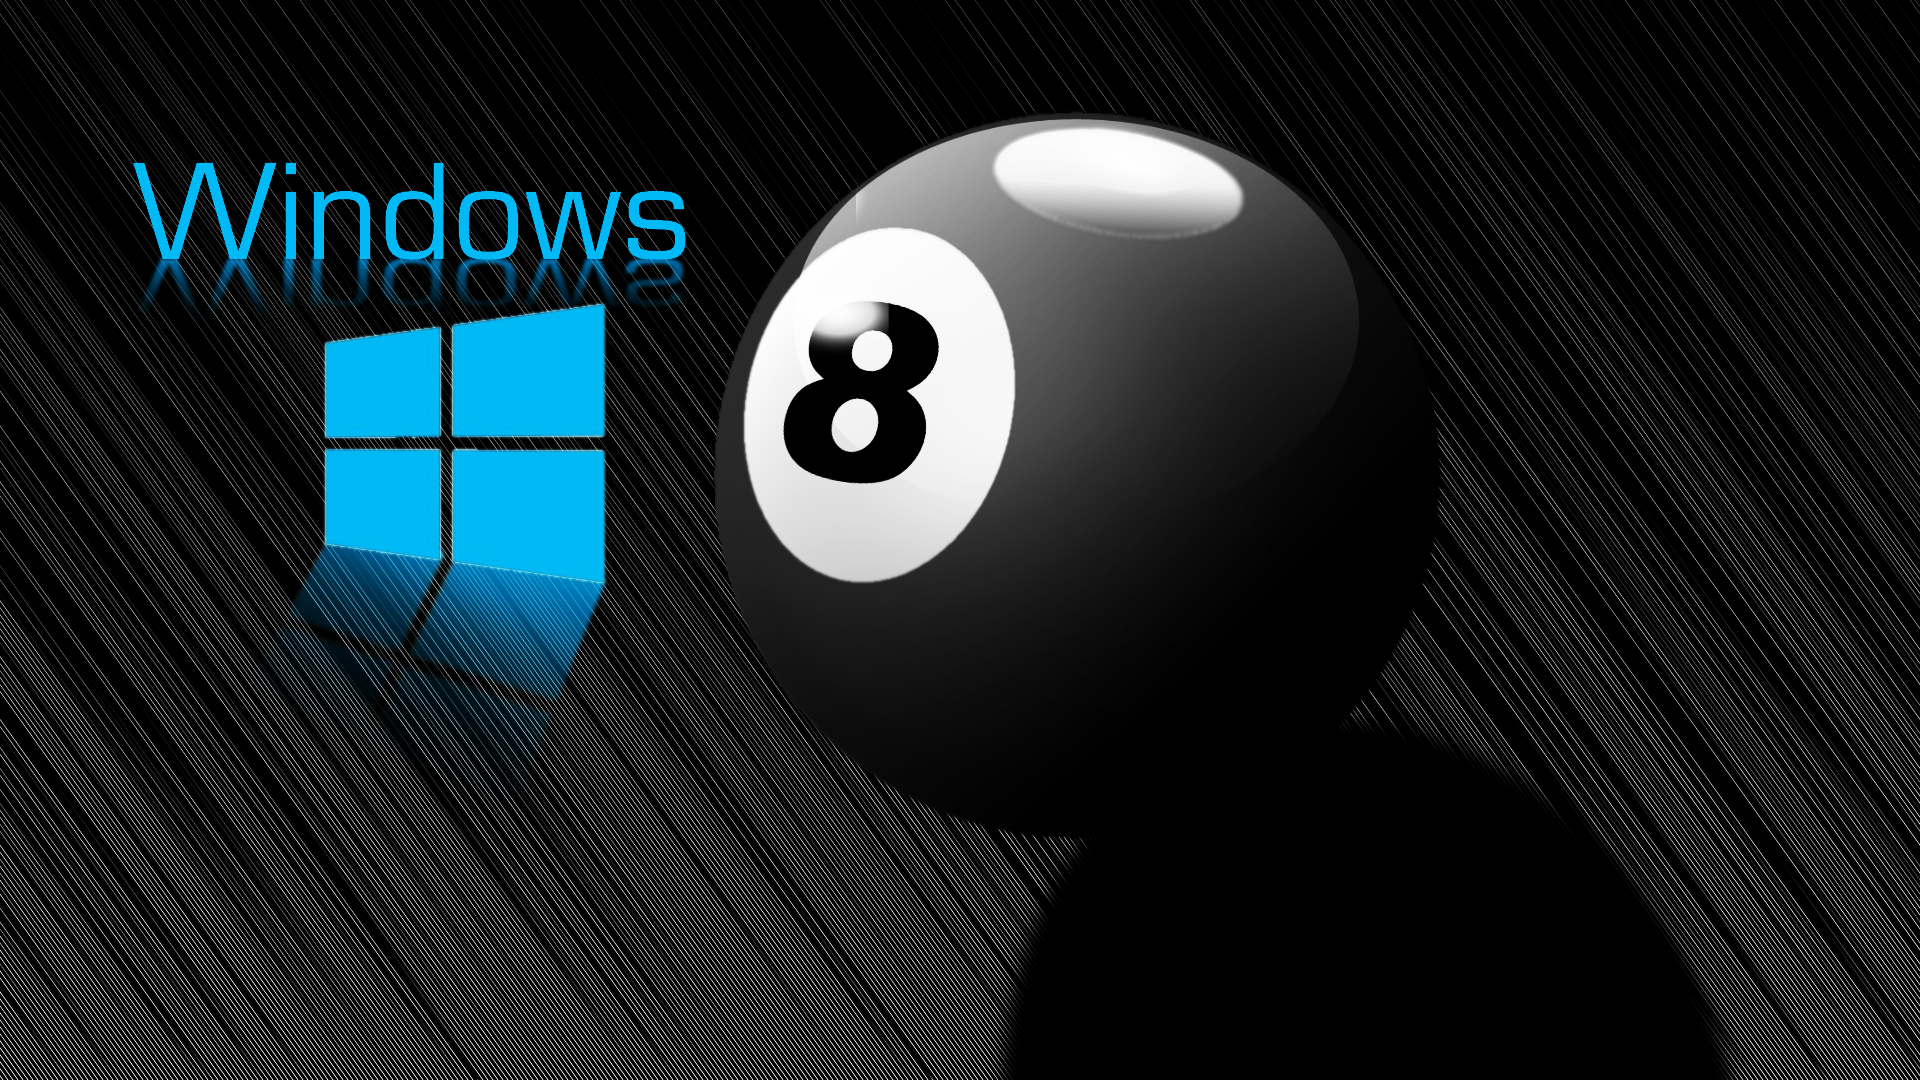 Windows 8 Backgrounds, Pictures, Images
 Full Hd Wallpapers For Windows 8 1920x1080